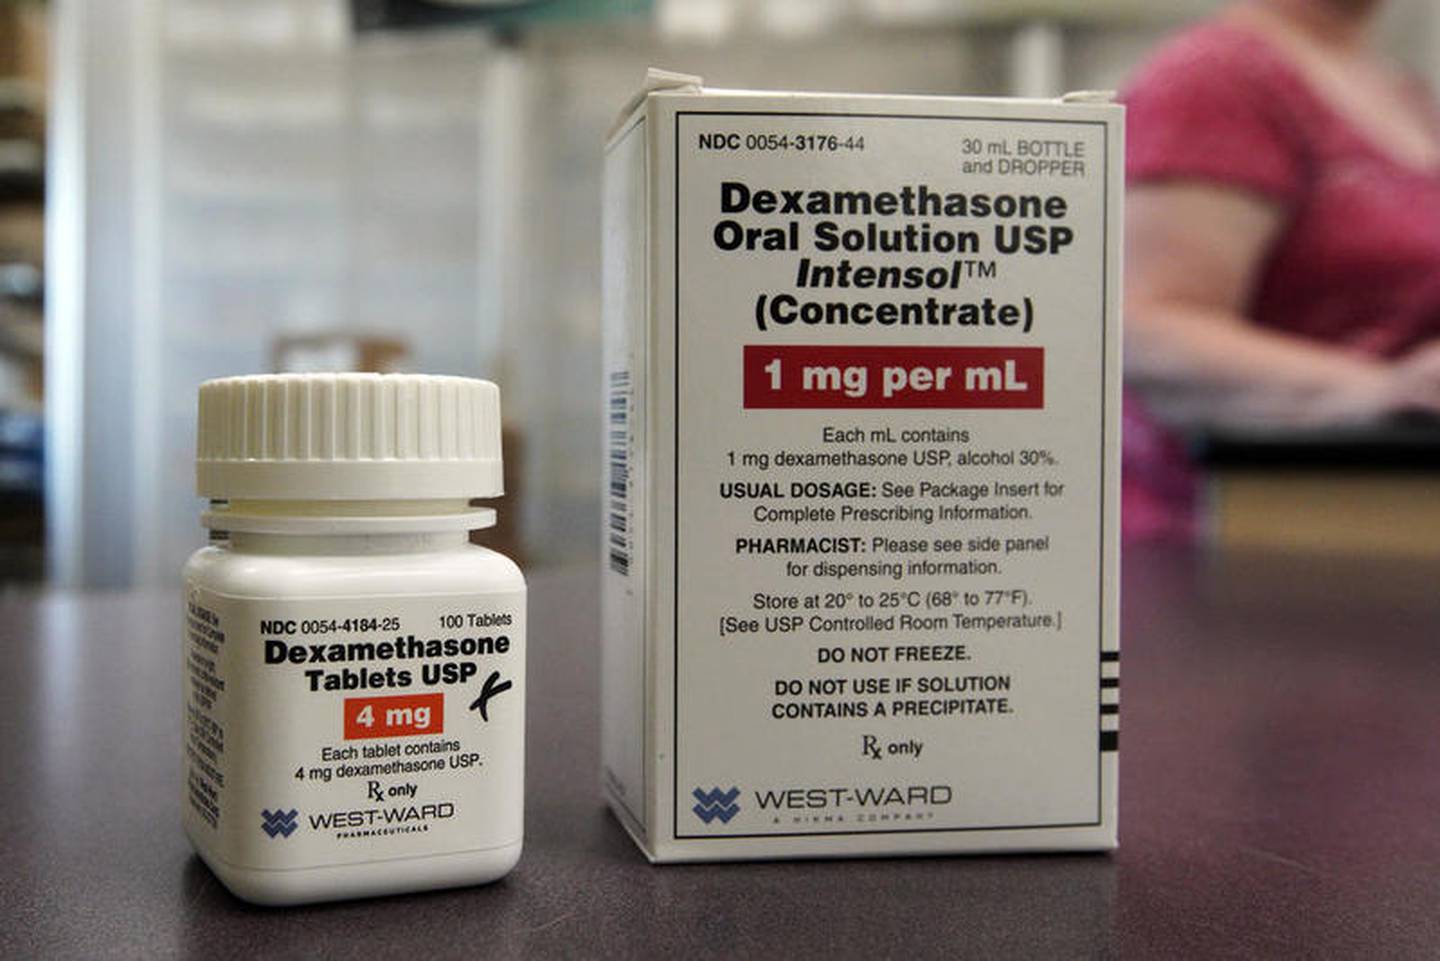 Packages of Dexamethasone are displayed in a pharmacy, Tuesday, June 16, 2020,  in Omaha, Neb. Researchers in England said Tuesday they have the first evidence that the drug can improve COVID-19 survival. The cheap, widely available steroid called dexamethasone reduced deaths by up to one third in severely ill hospitalized patients. (AP Photo/Nati Harnik)